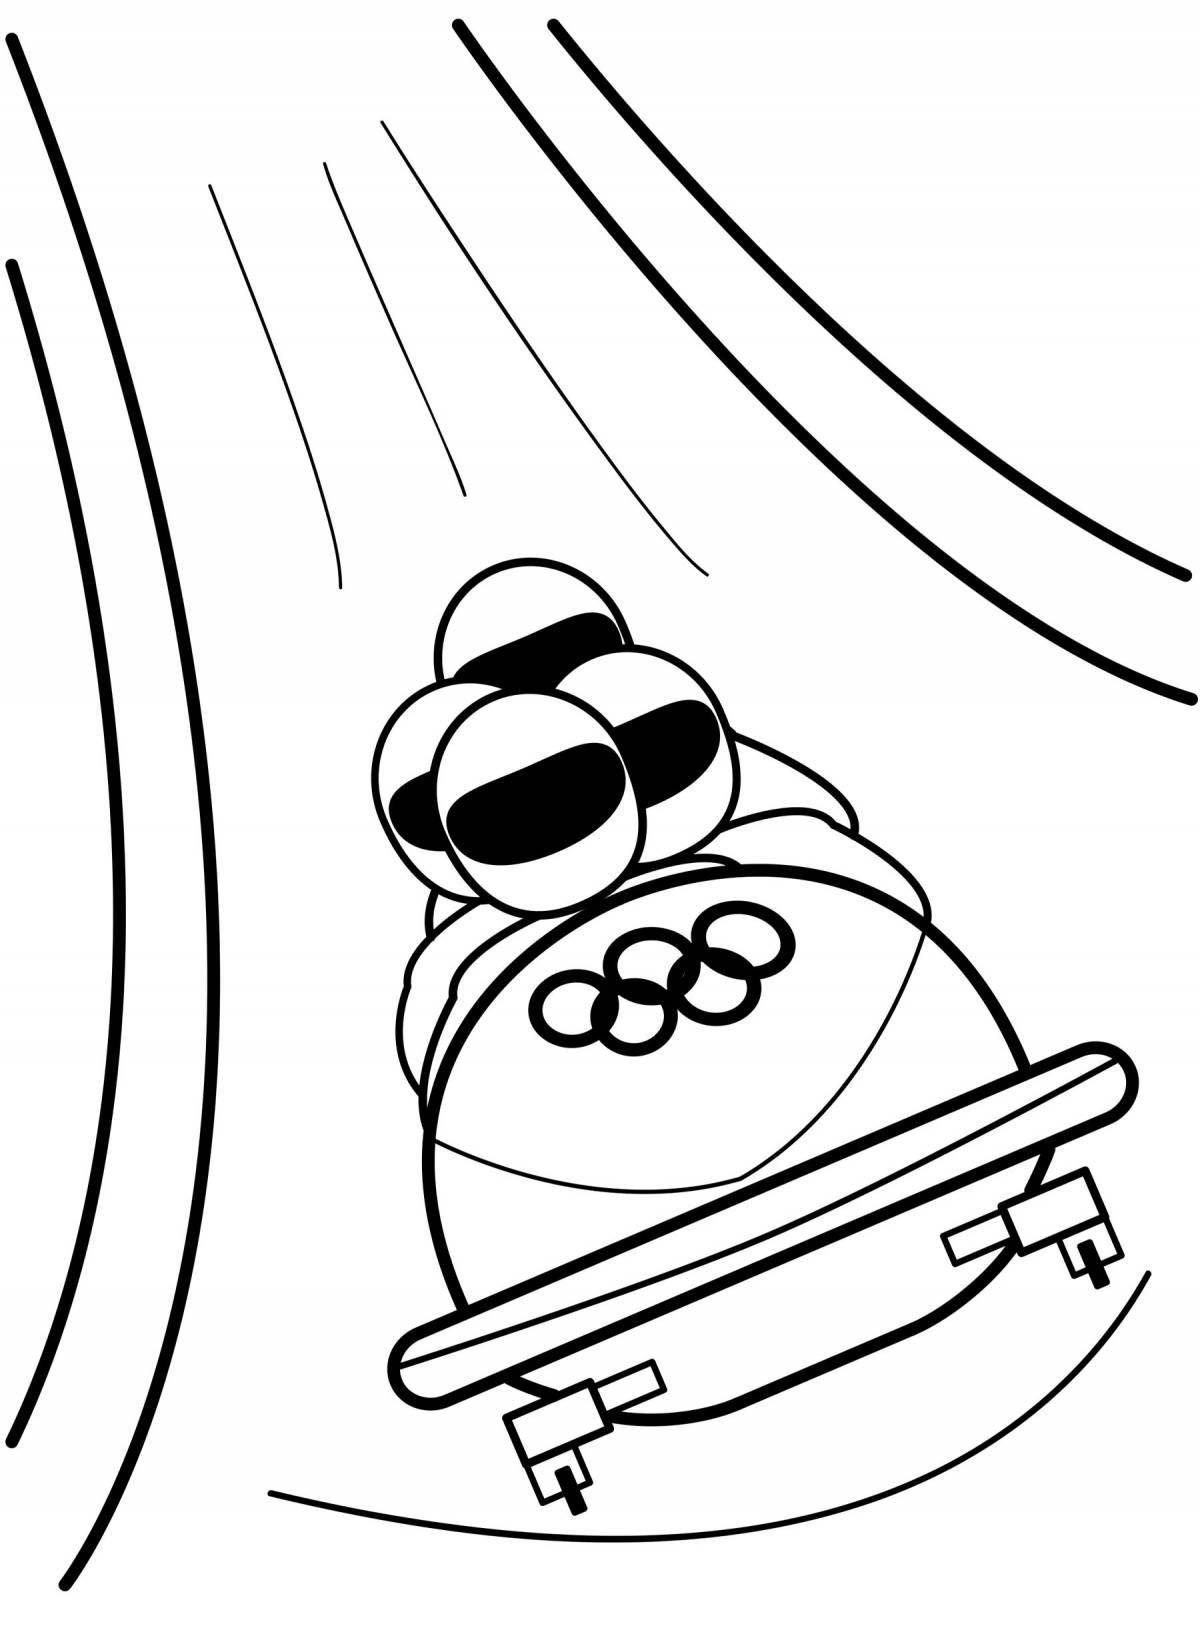 Excited winter sports coloring page